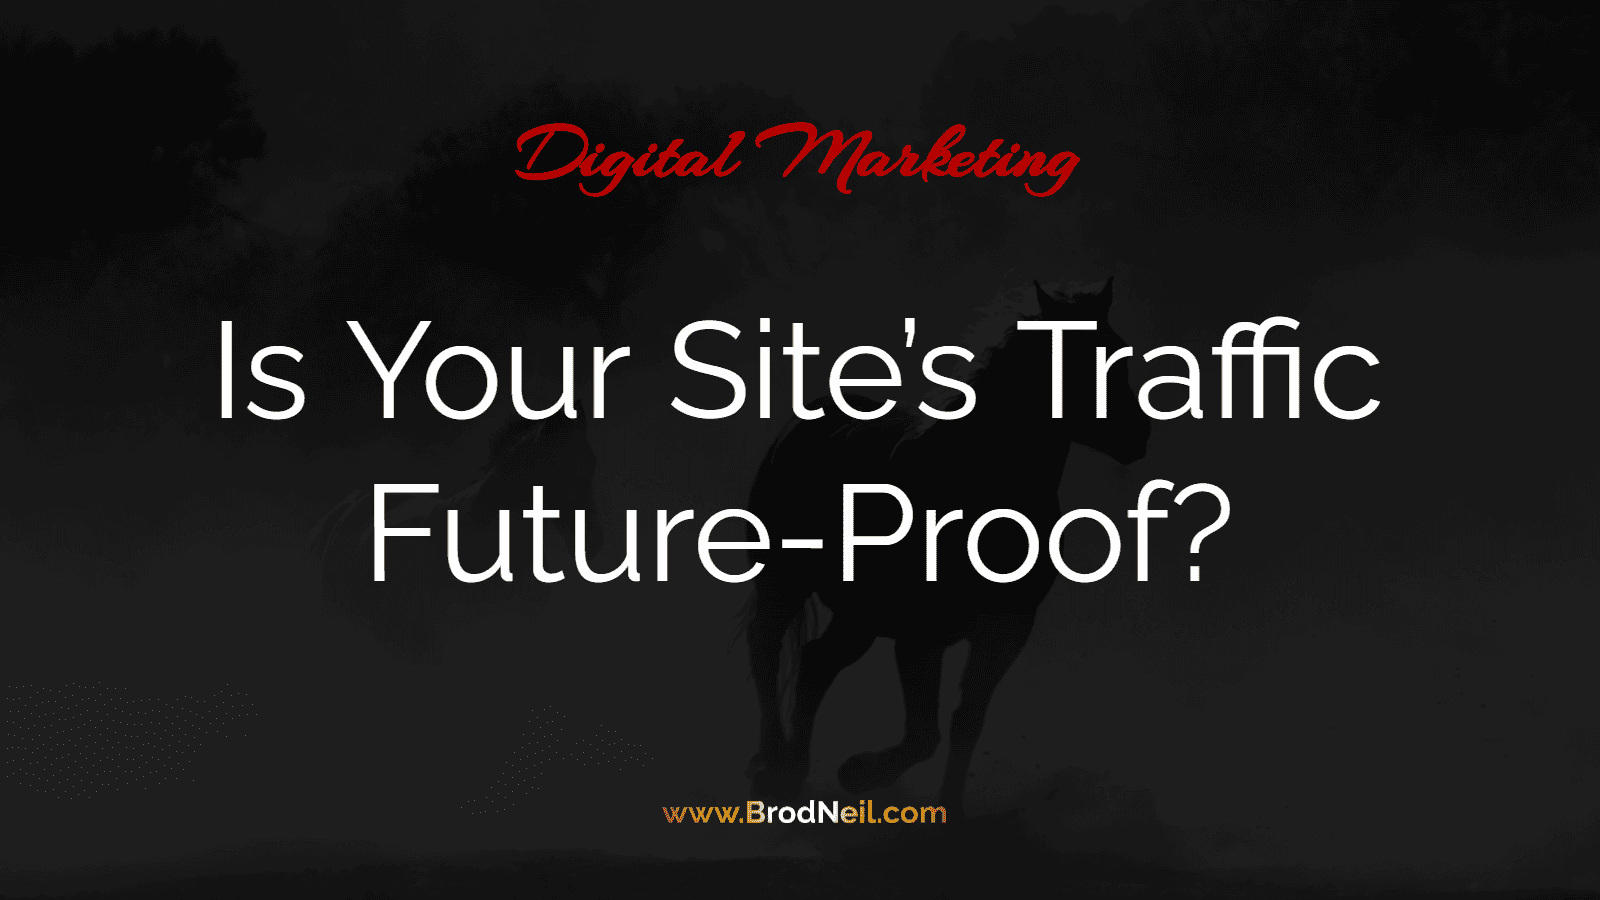 Is Your Site’s Traffic Future-Proof?